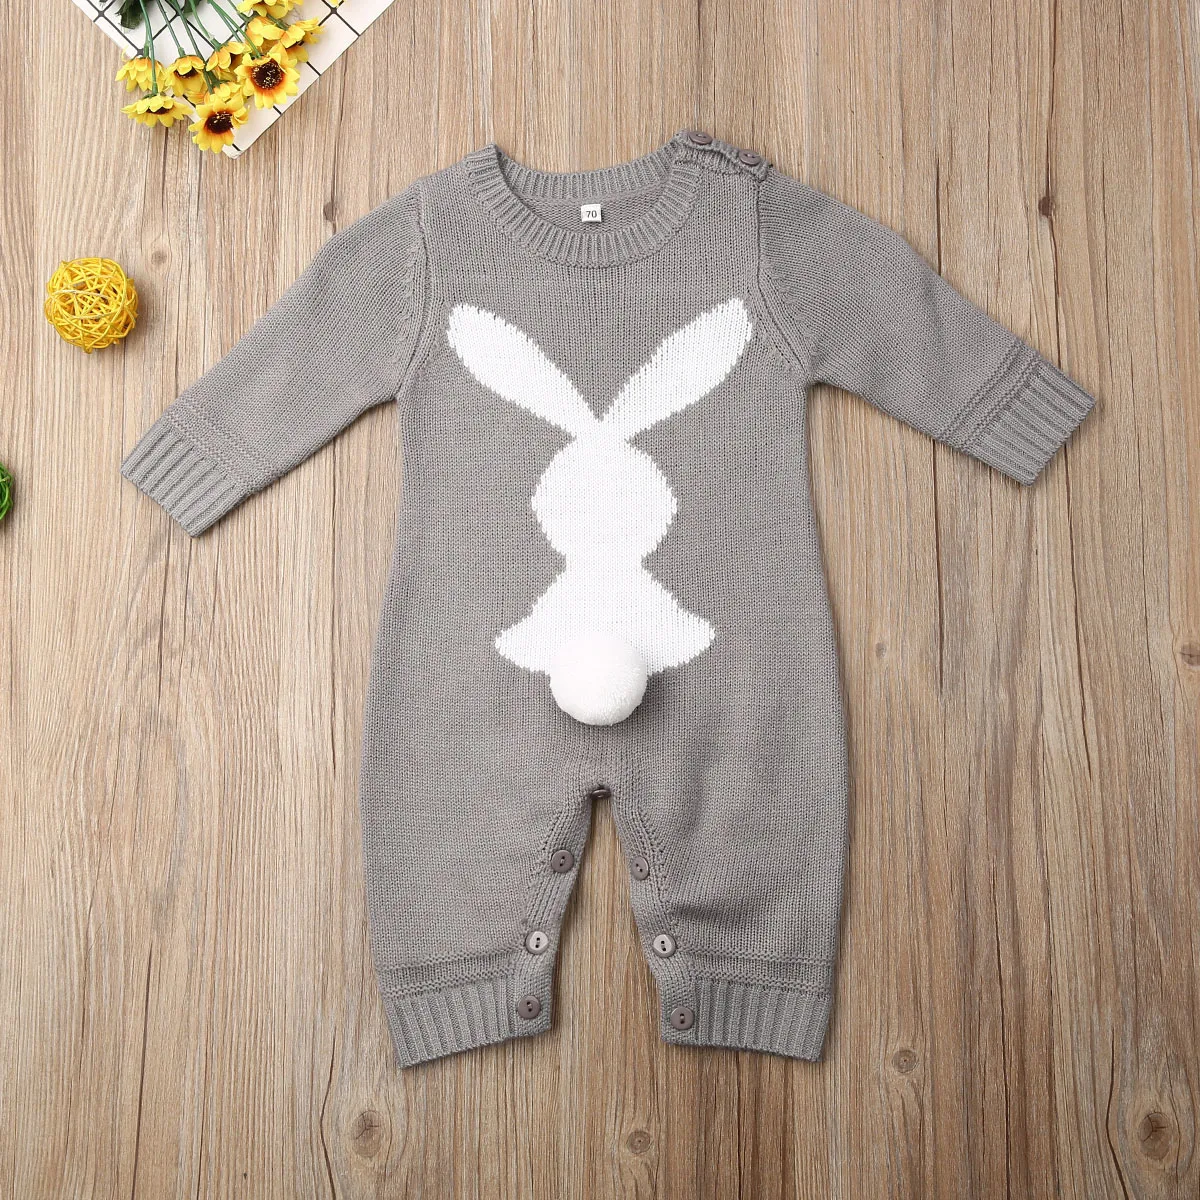 Baby Rompers Set Newborn Rabbit Baby Jumpsuit Overall Long Sleevele Baby Boys Clothes Autumn Knitted Girls Baby Casual Clothes